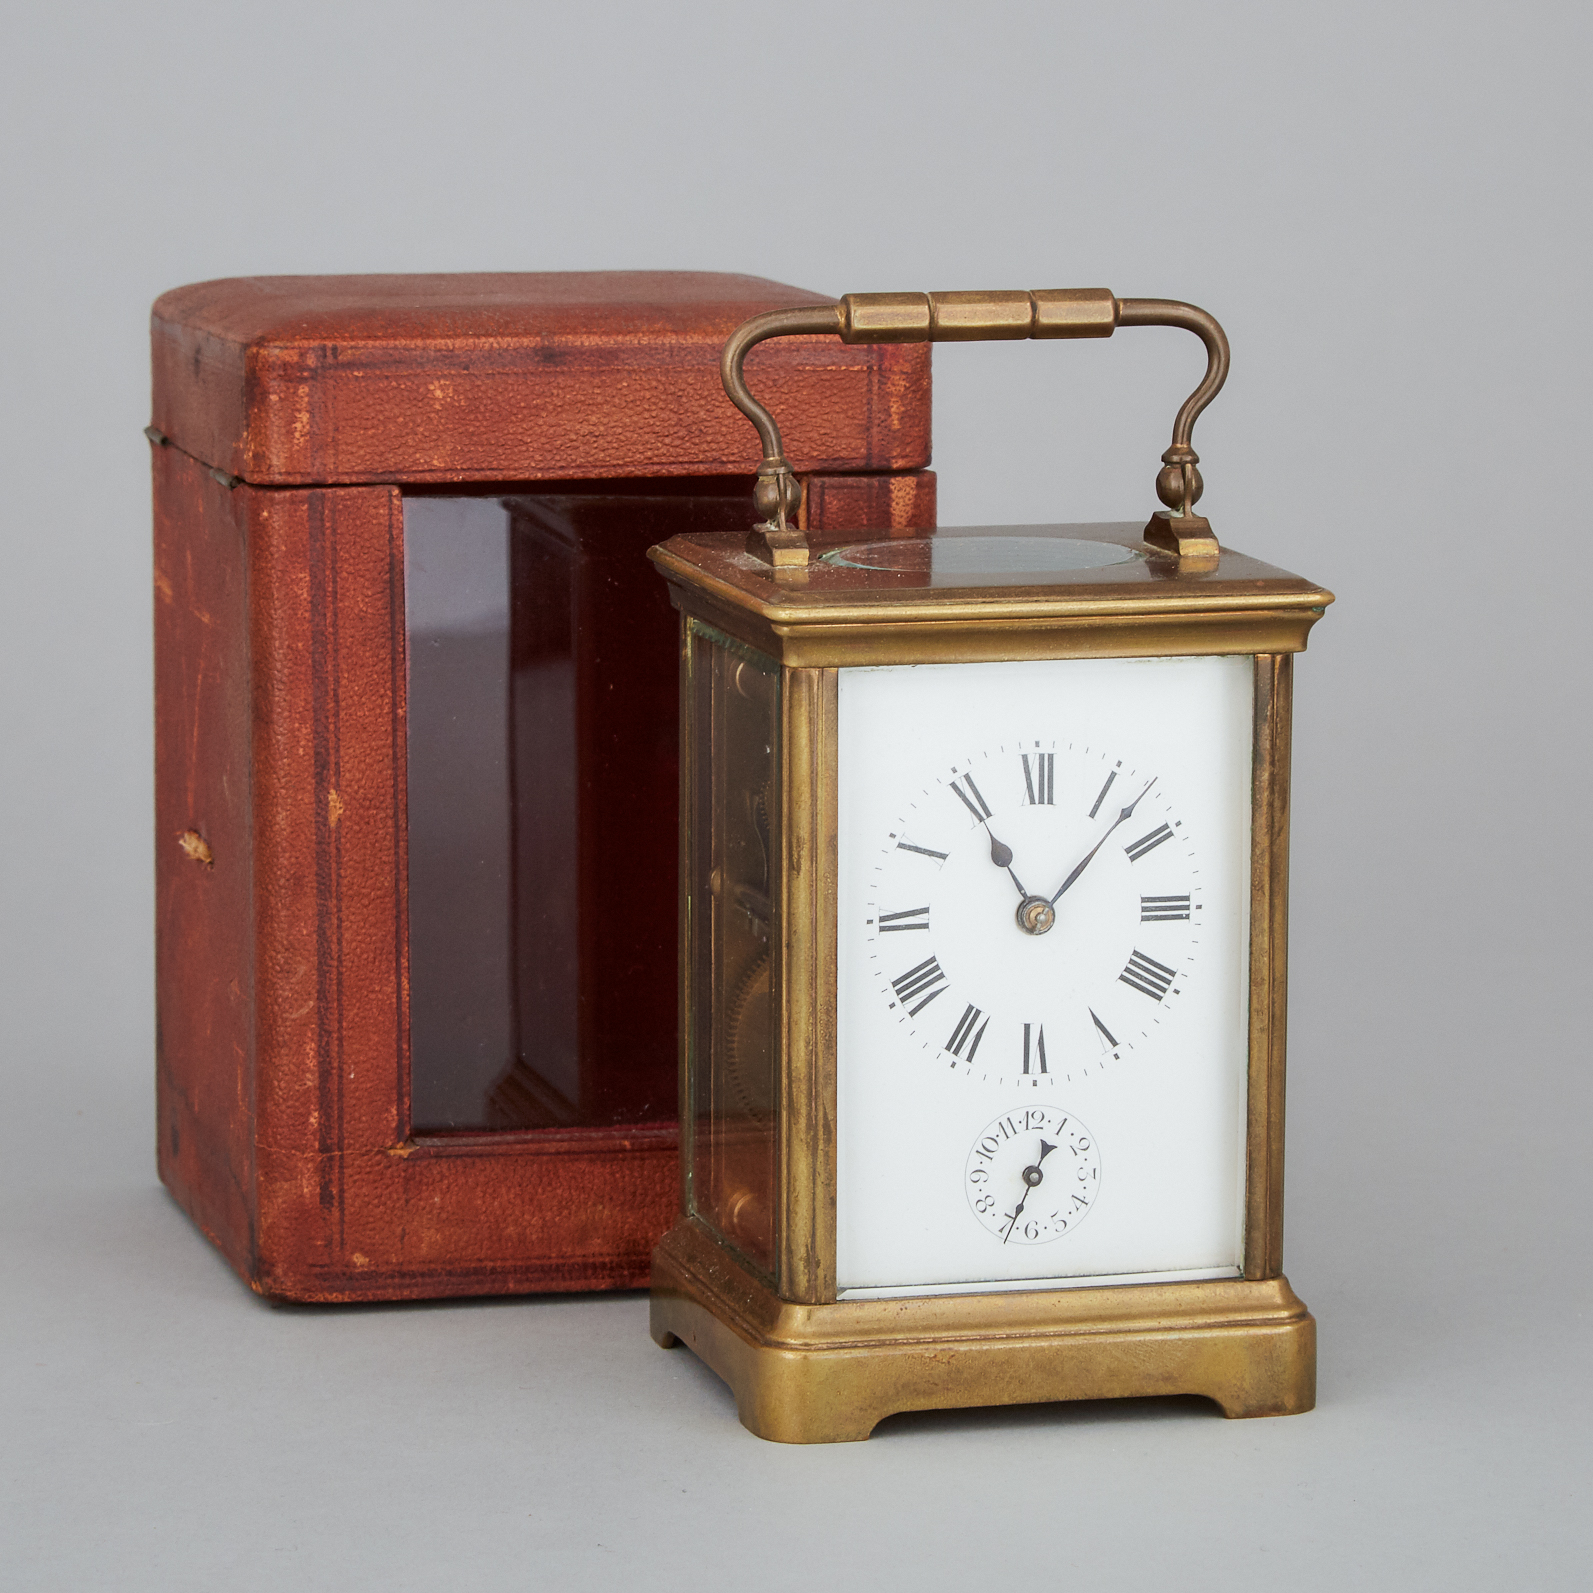 French Carriage Clock with Alarm, c.1900